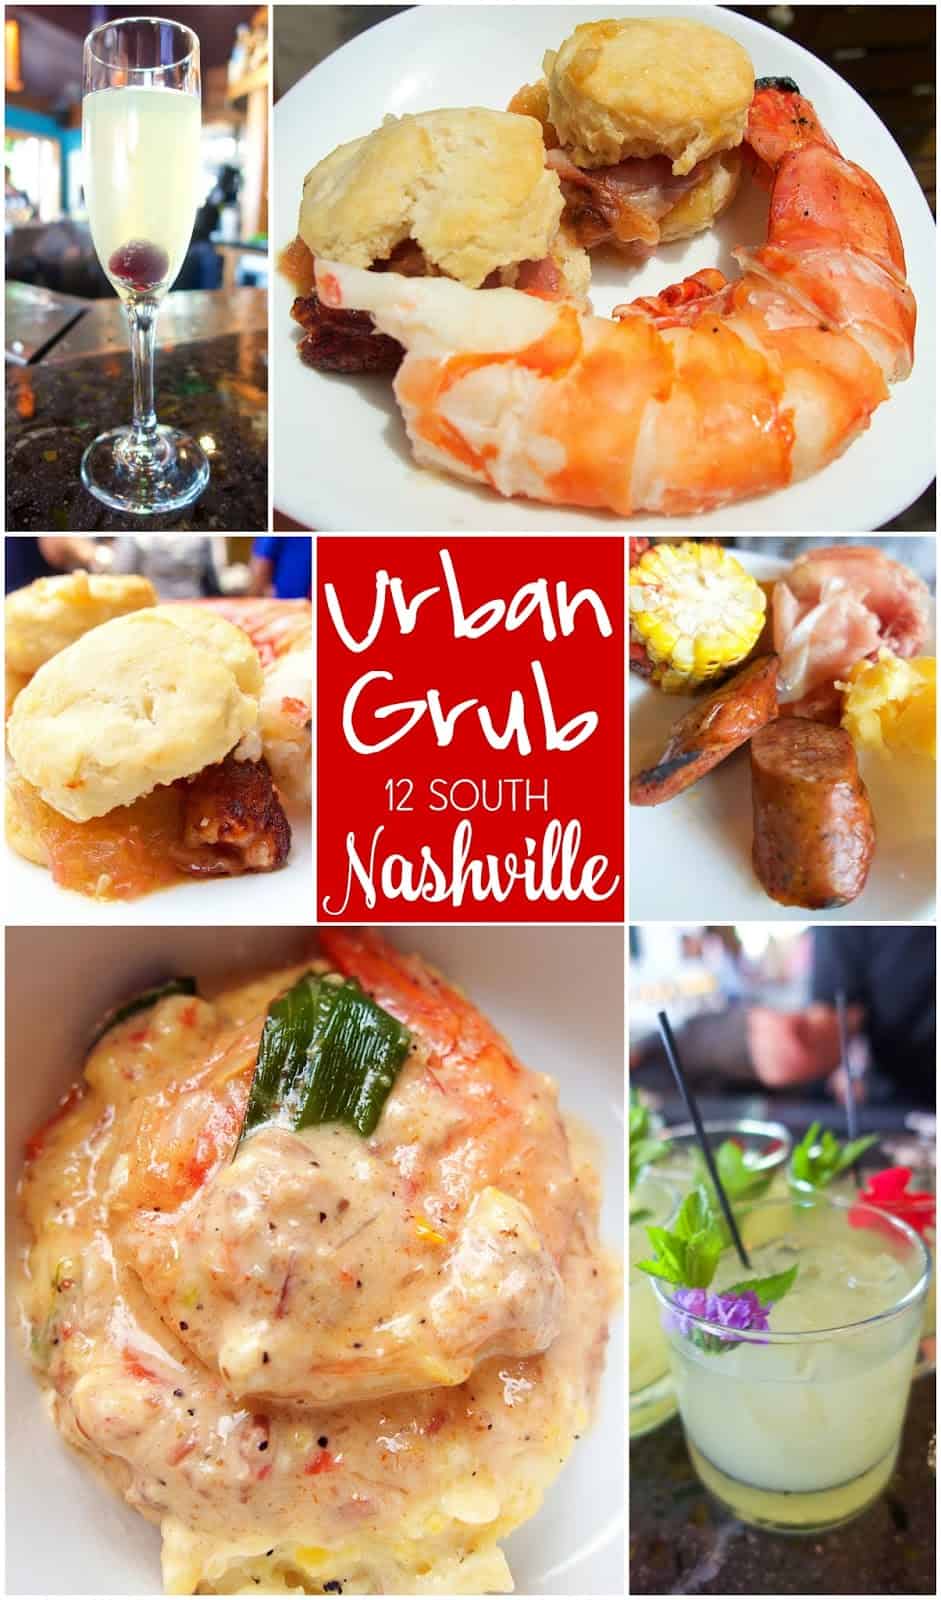 Urban Grub - 12 South Nashville - homemade charcuterie, fresh fish and dry aged steaks. They have something for everyone!